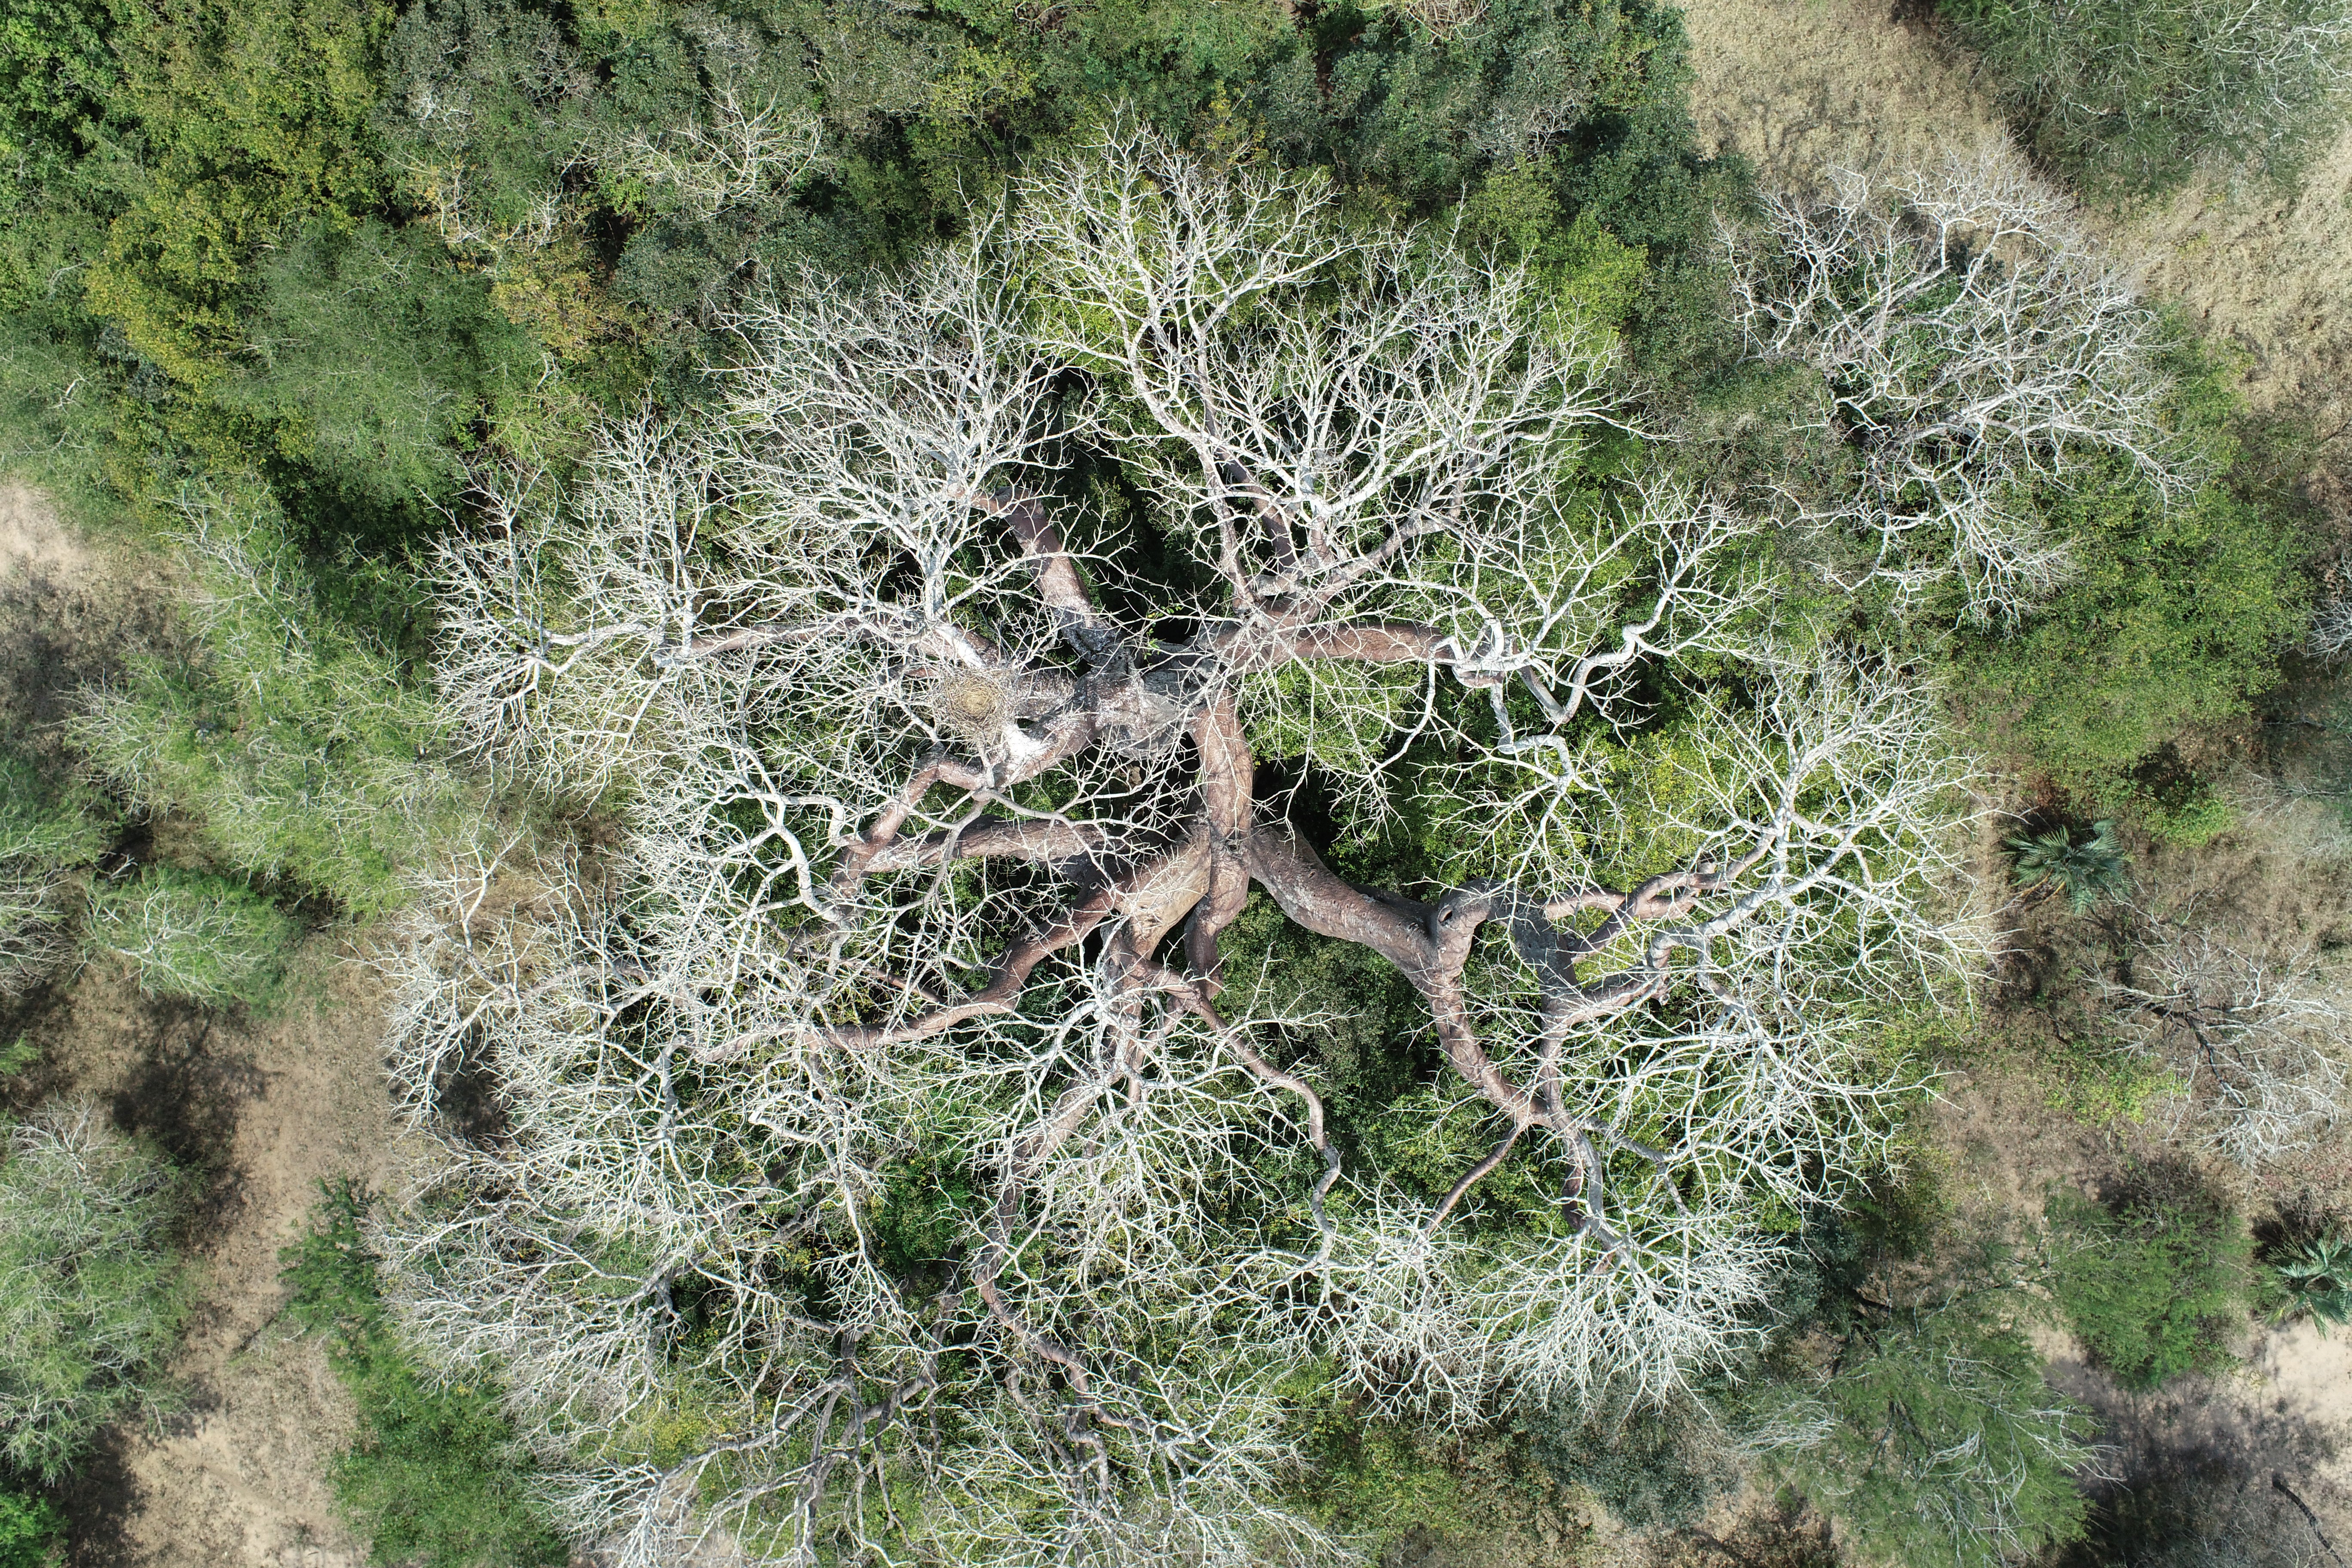 Aerial view of a large gray tree with a weblike network of branches surrounded by bright green shrubs